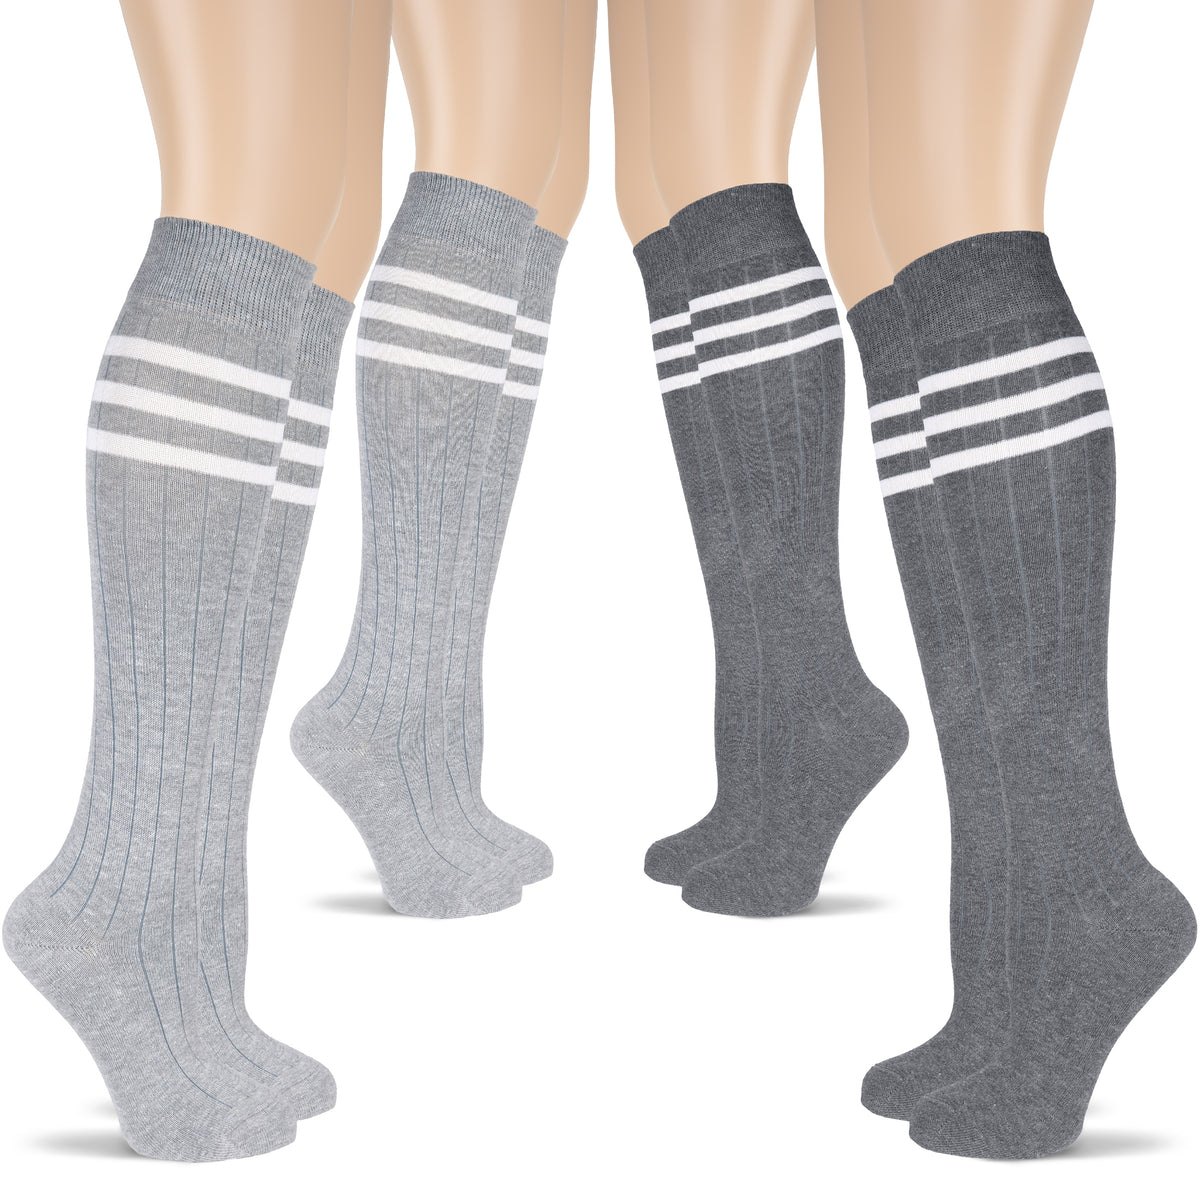 Elevate your sock game with these four pairs of women's knee-high socks, boasting white and gray stripes. Crafted from cotton for ultimate comfort.